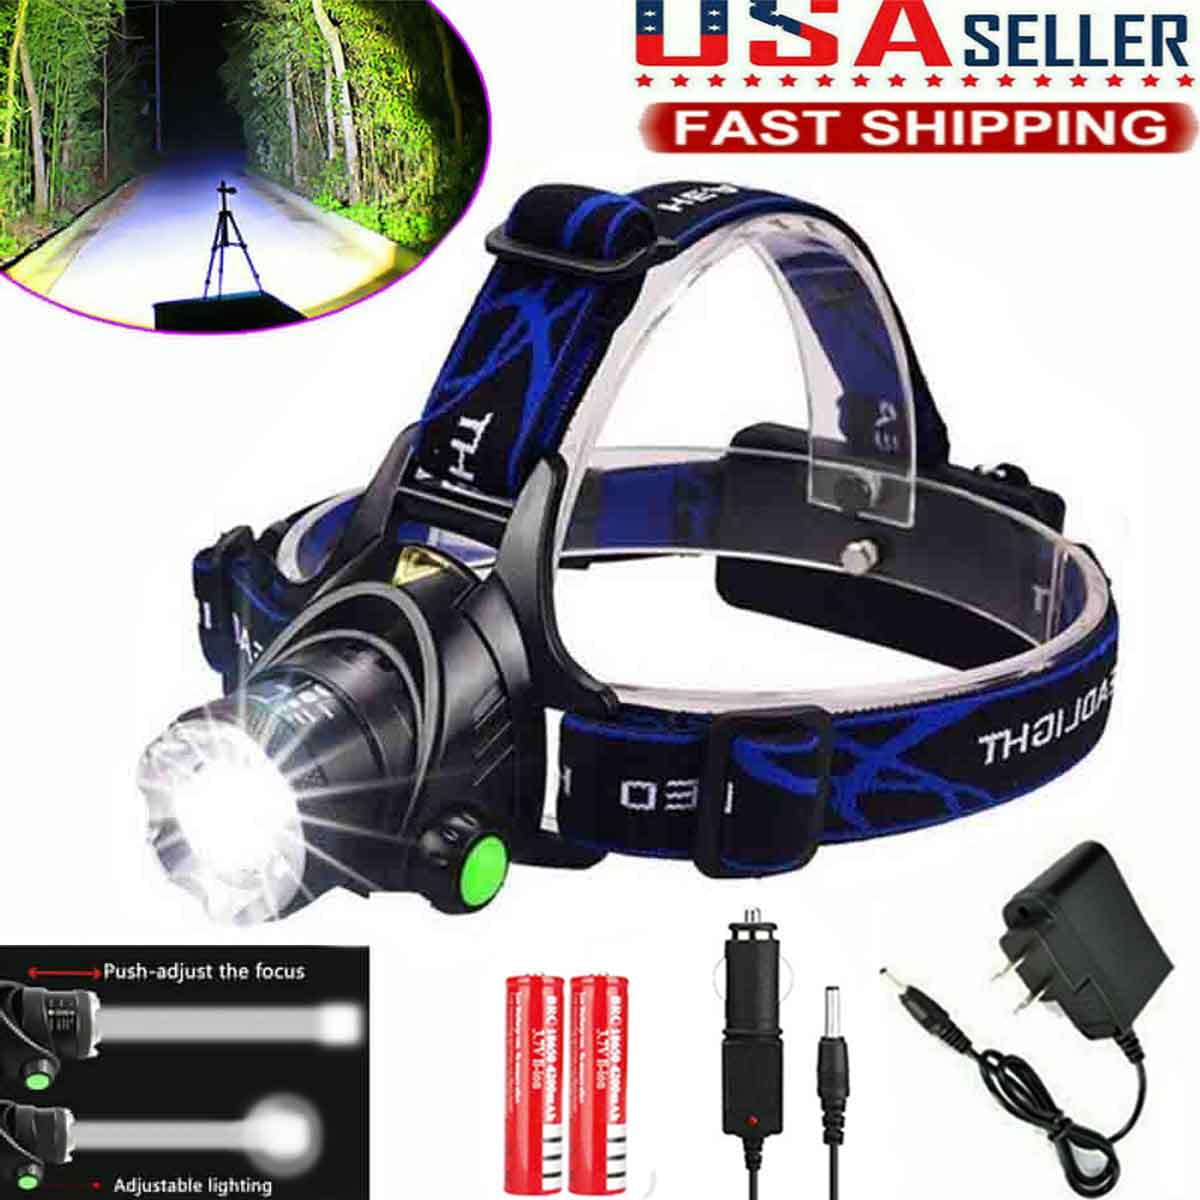 990000LM LED Headlamp Rechargeable Headlight Zoomable Head Torch Lamp Flashlight 